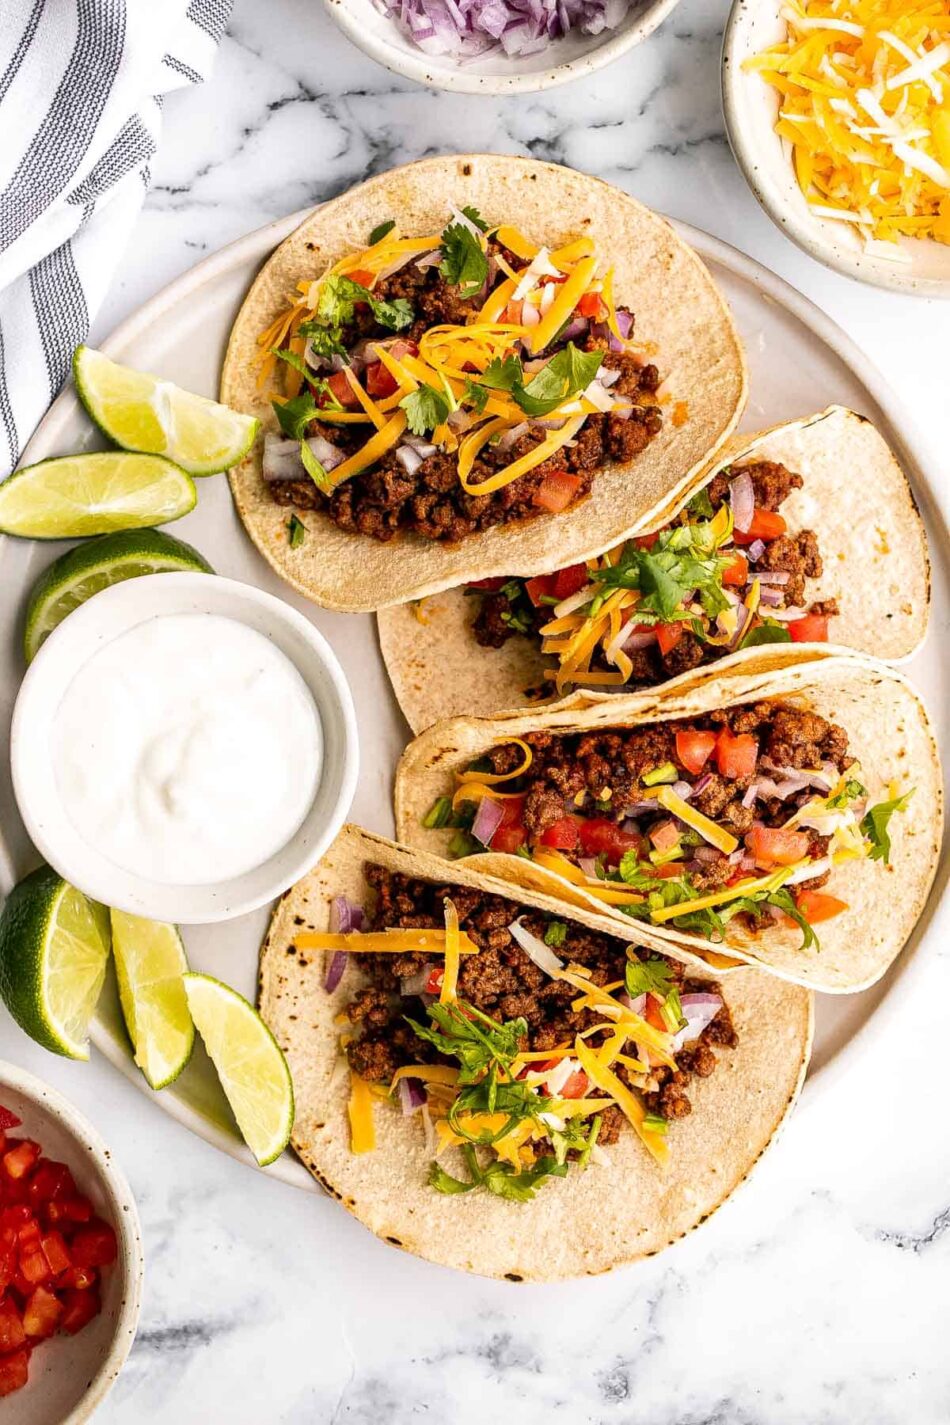 Mexican Ground Beef Tacos